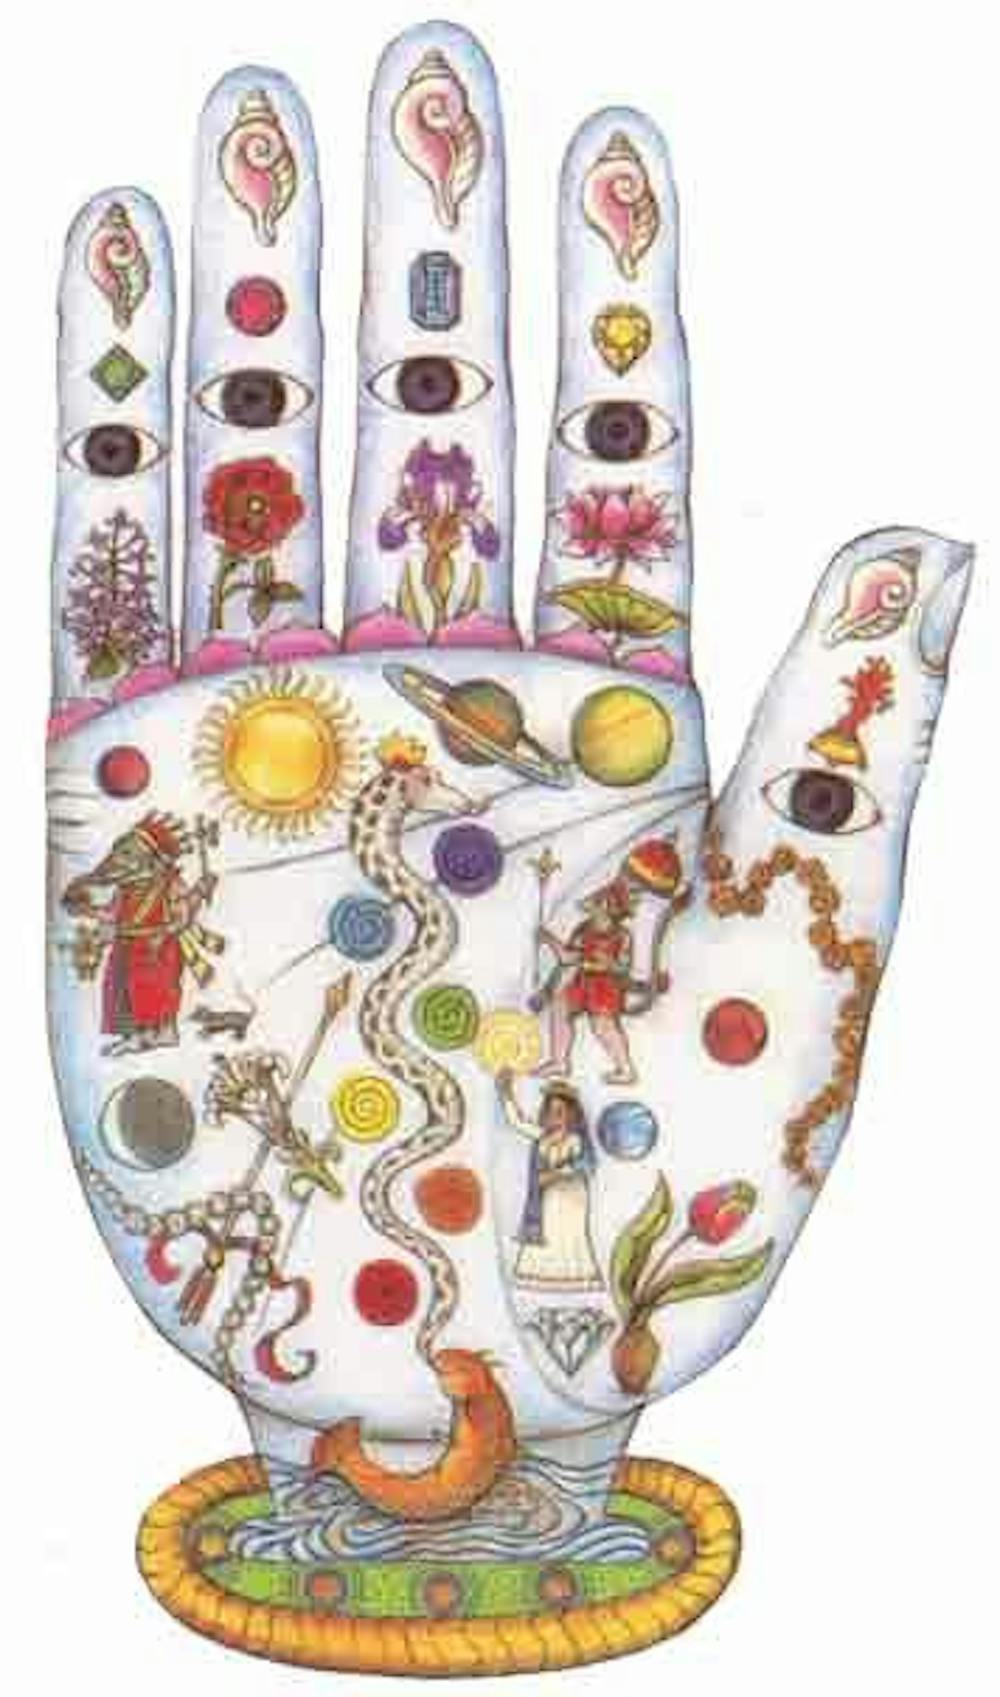 In Kundalini yoga, those who practice fold hands and fingers in the sacred mudras. Photo courtesy of Online Yoga Sports.